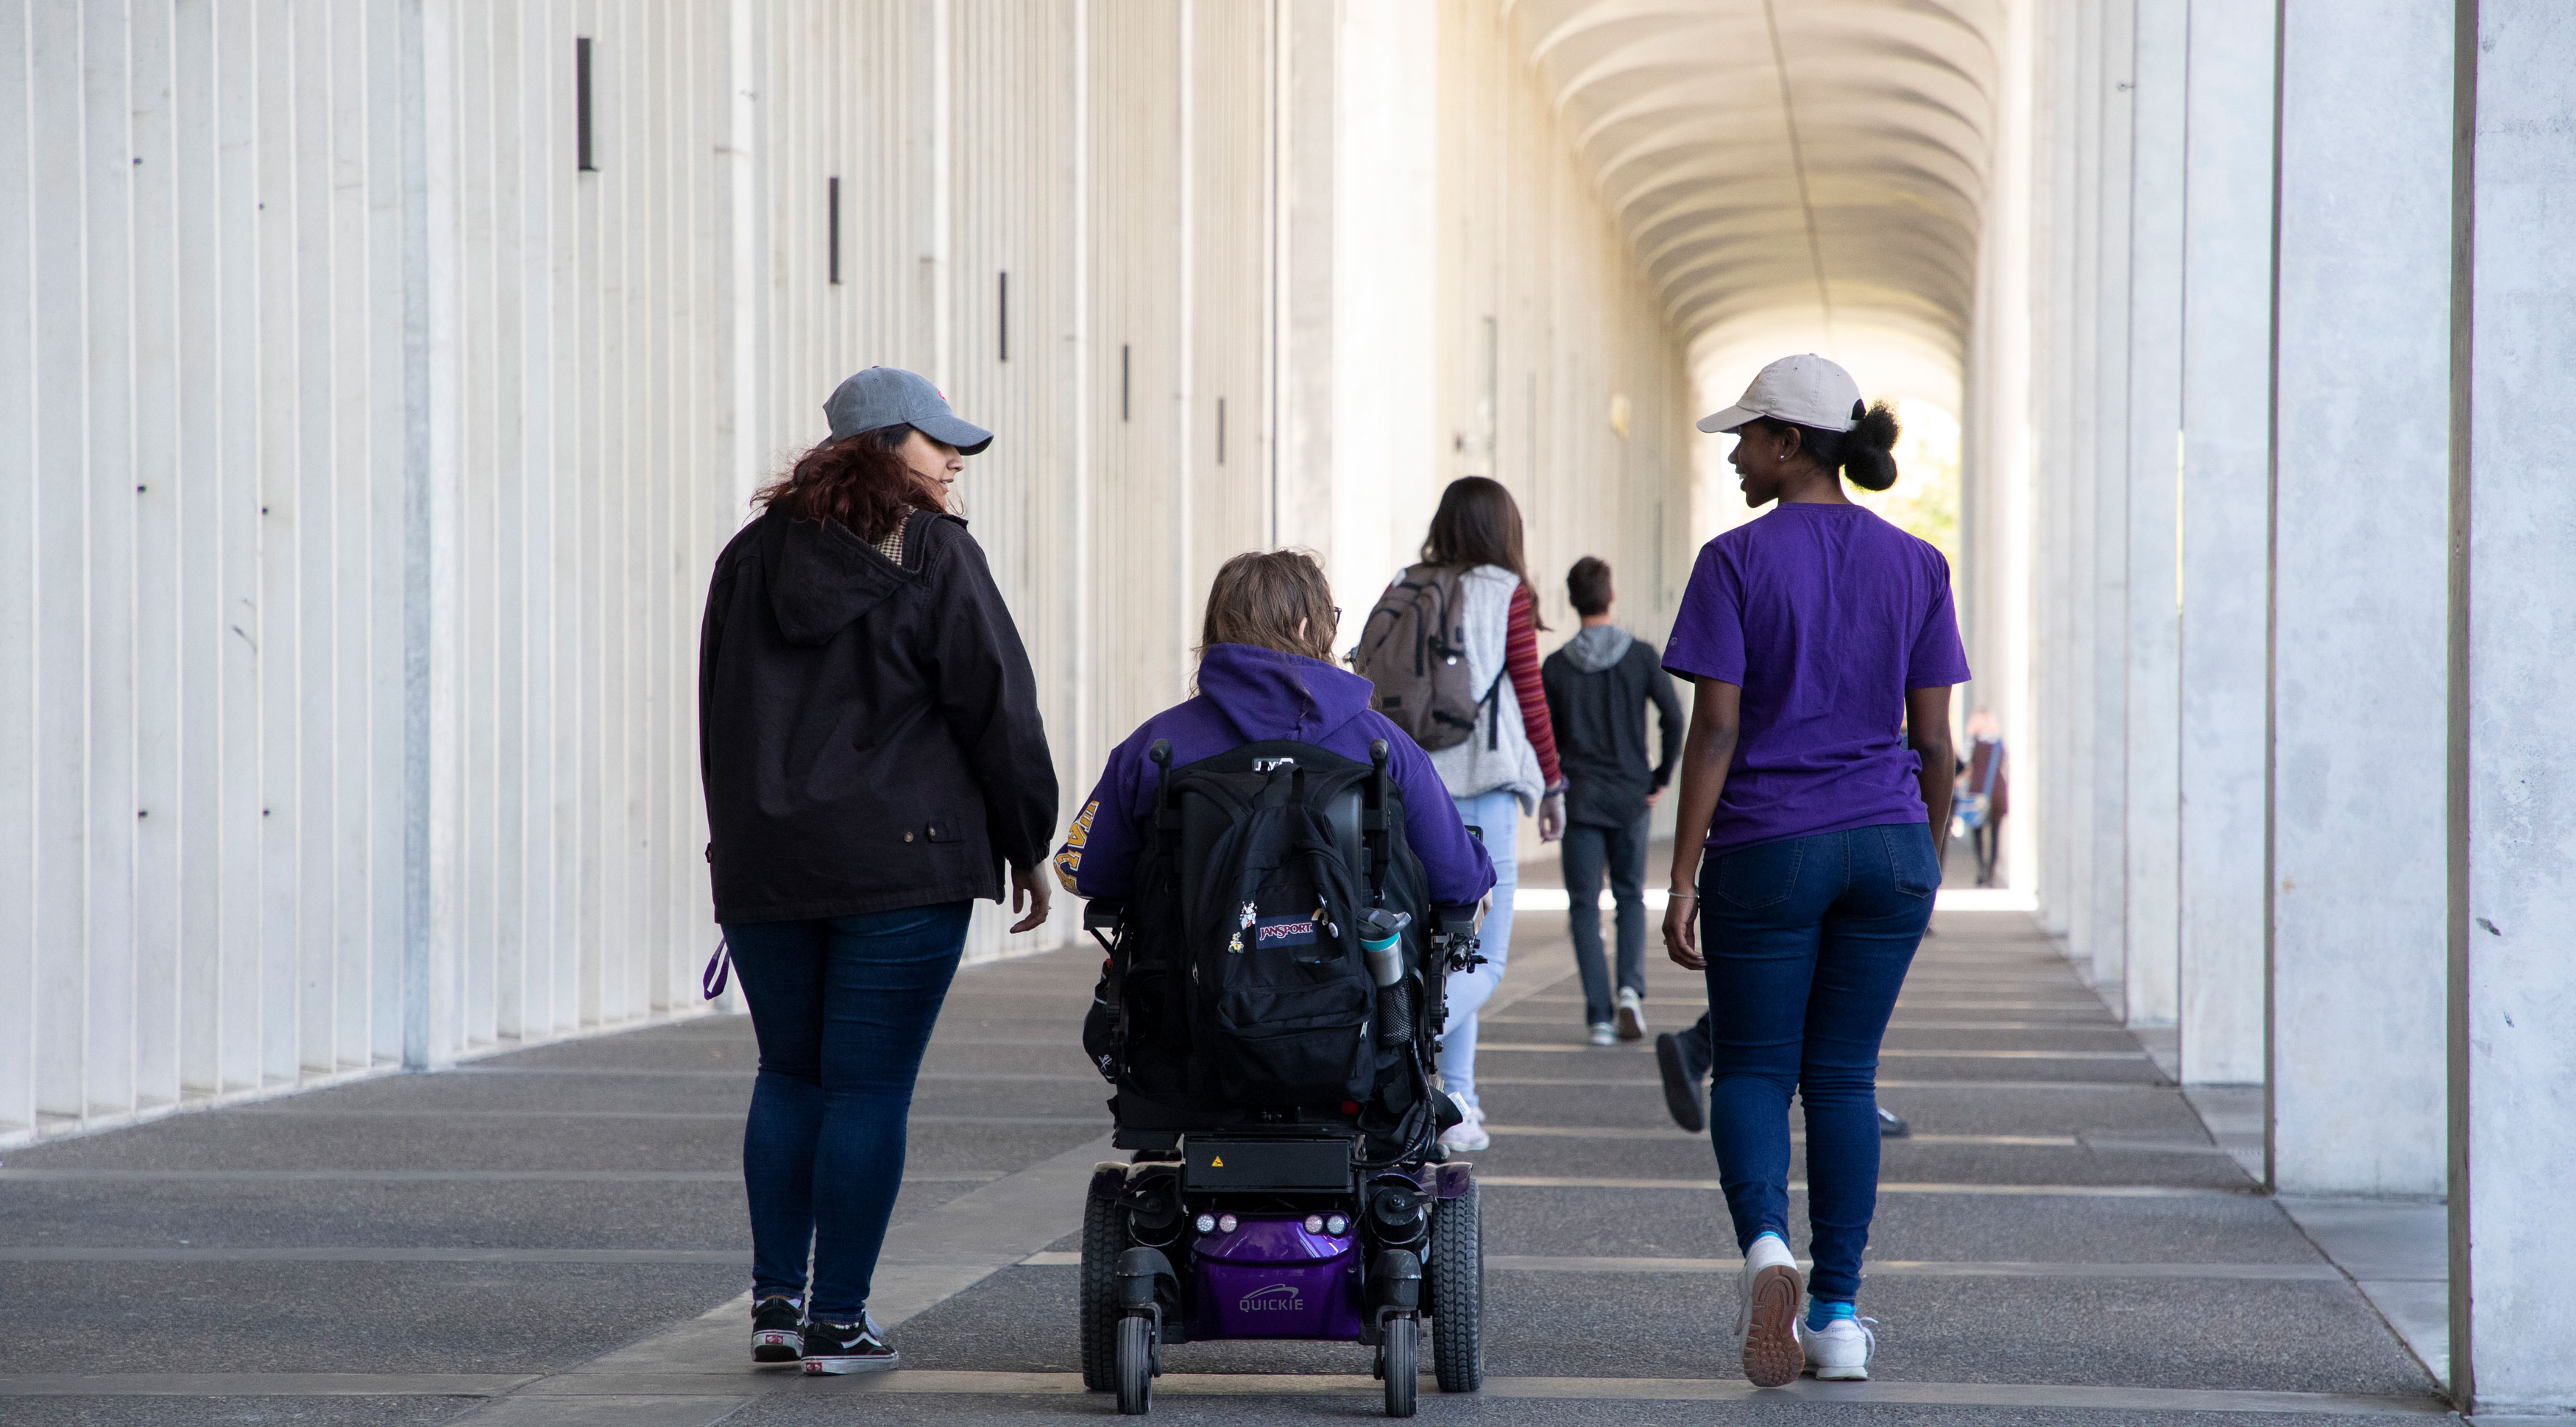 Two students walk on either side of a third student using a motorized wheelchair under the arches of UAlbany's Uptown Campus.